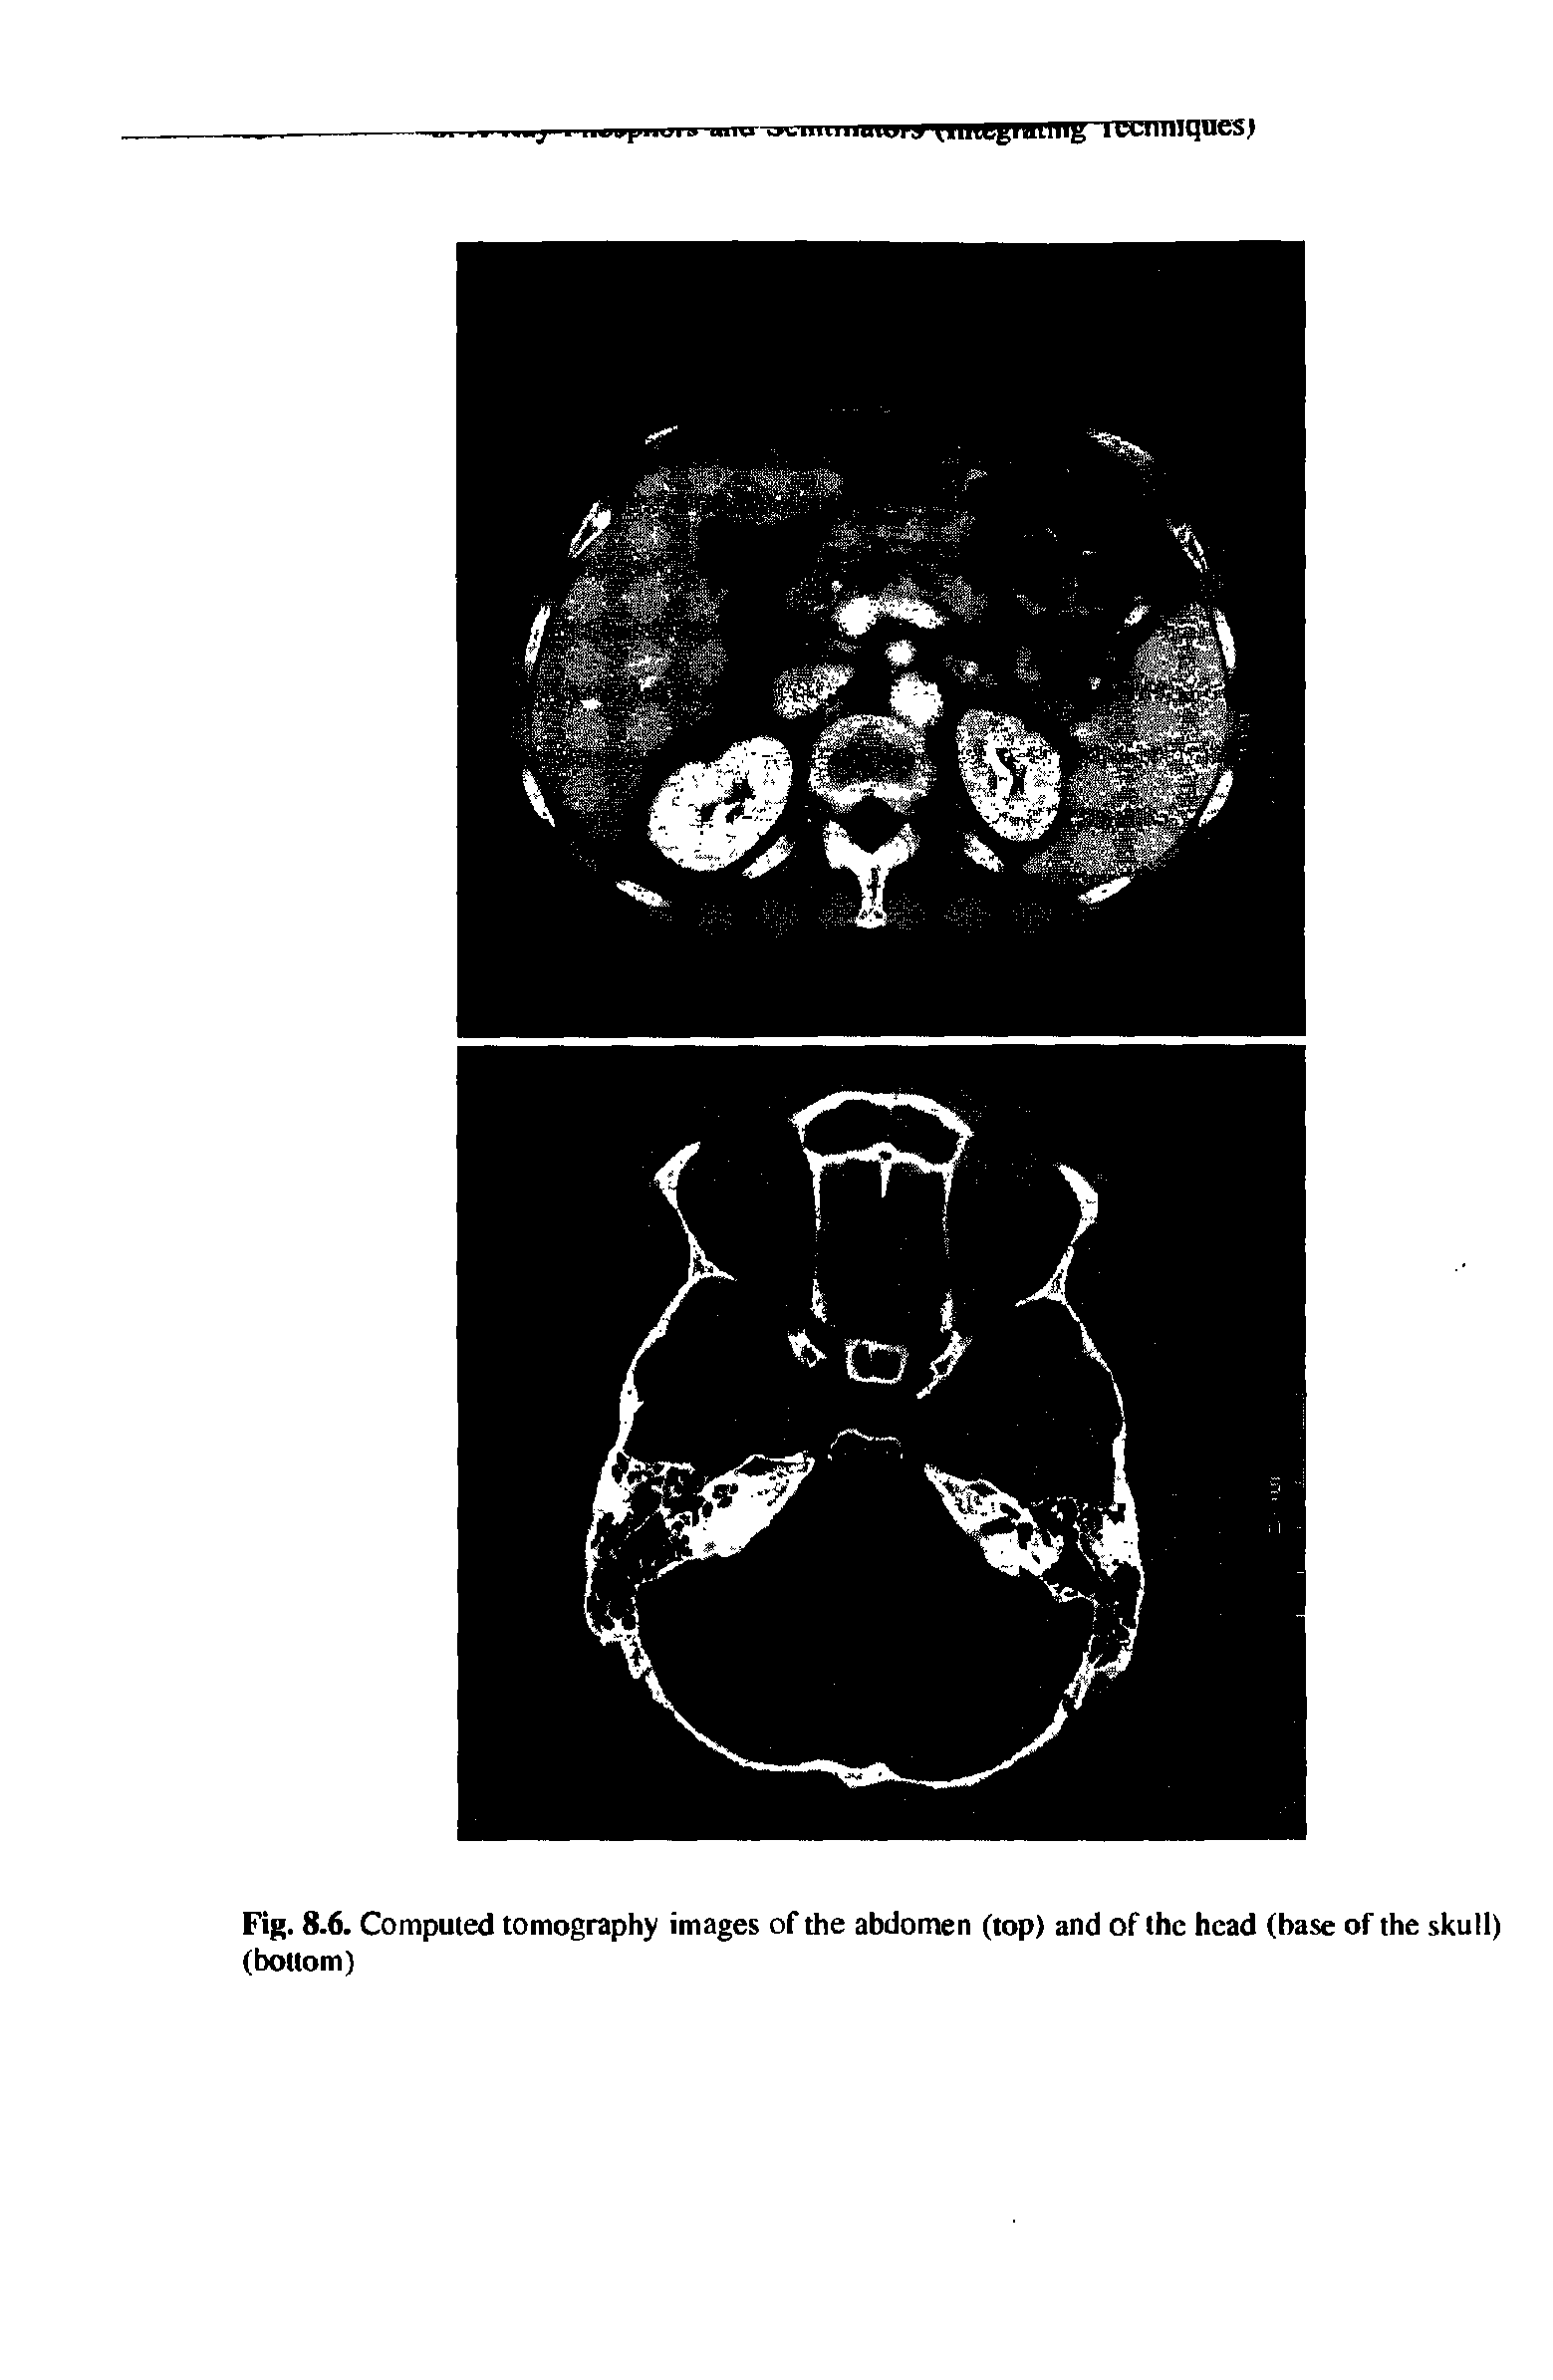 Fig. 8.6. Computed tomography images of the abdomen (top) and of the head (base of the skull) (bottom)...